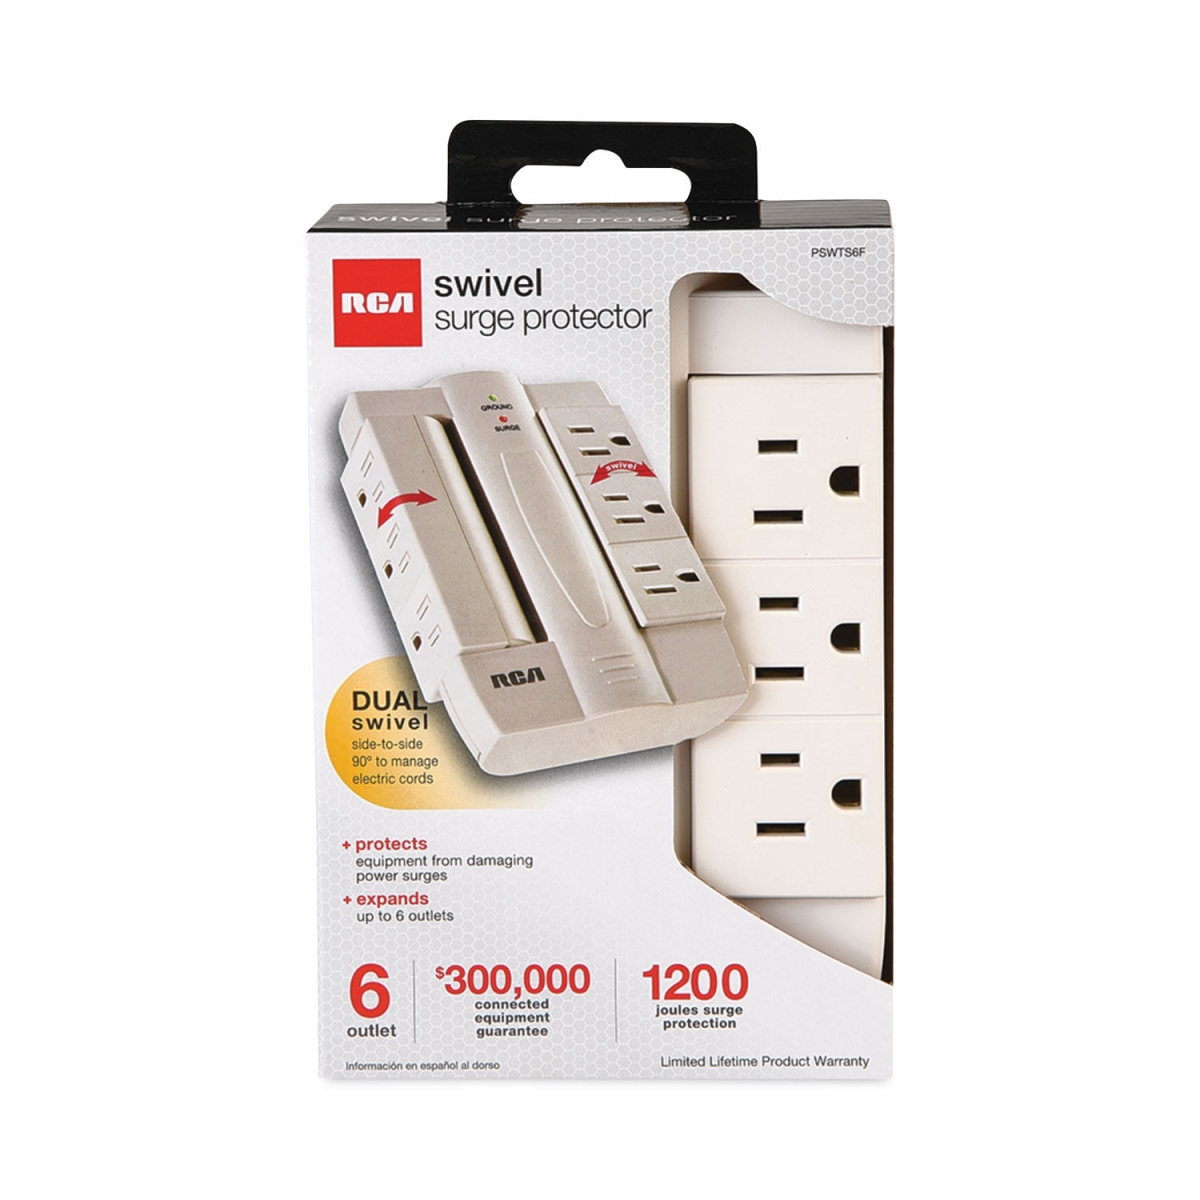 RCA VOXPSWTS6FV 6 Outlet Swivel Surge Protector - 6 AC Outlets - 1200 J - White